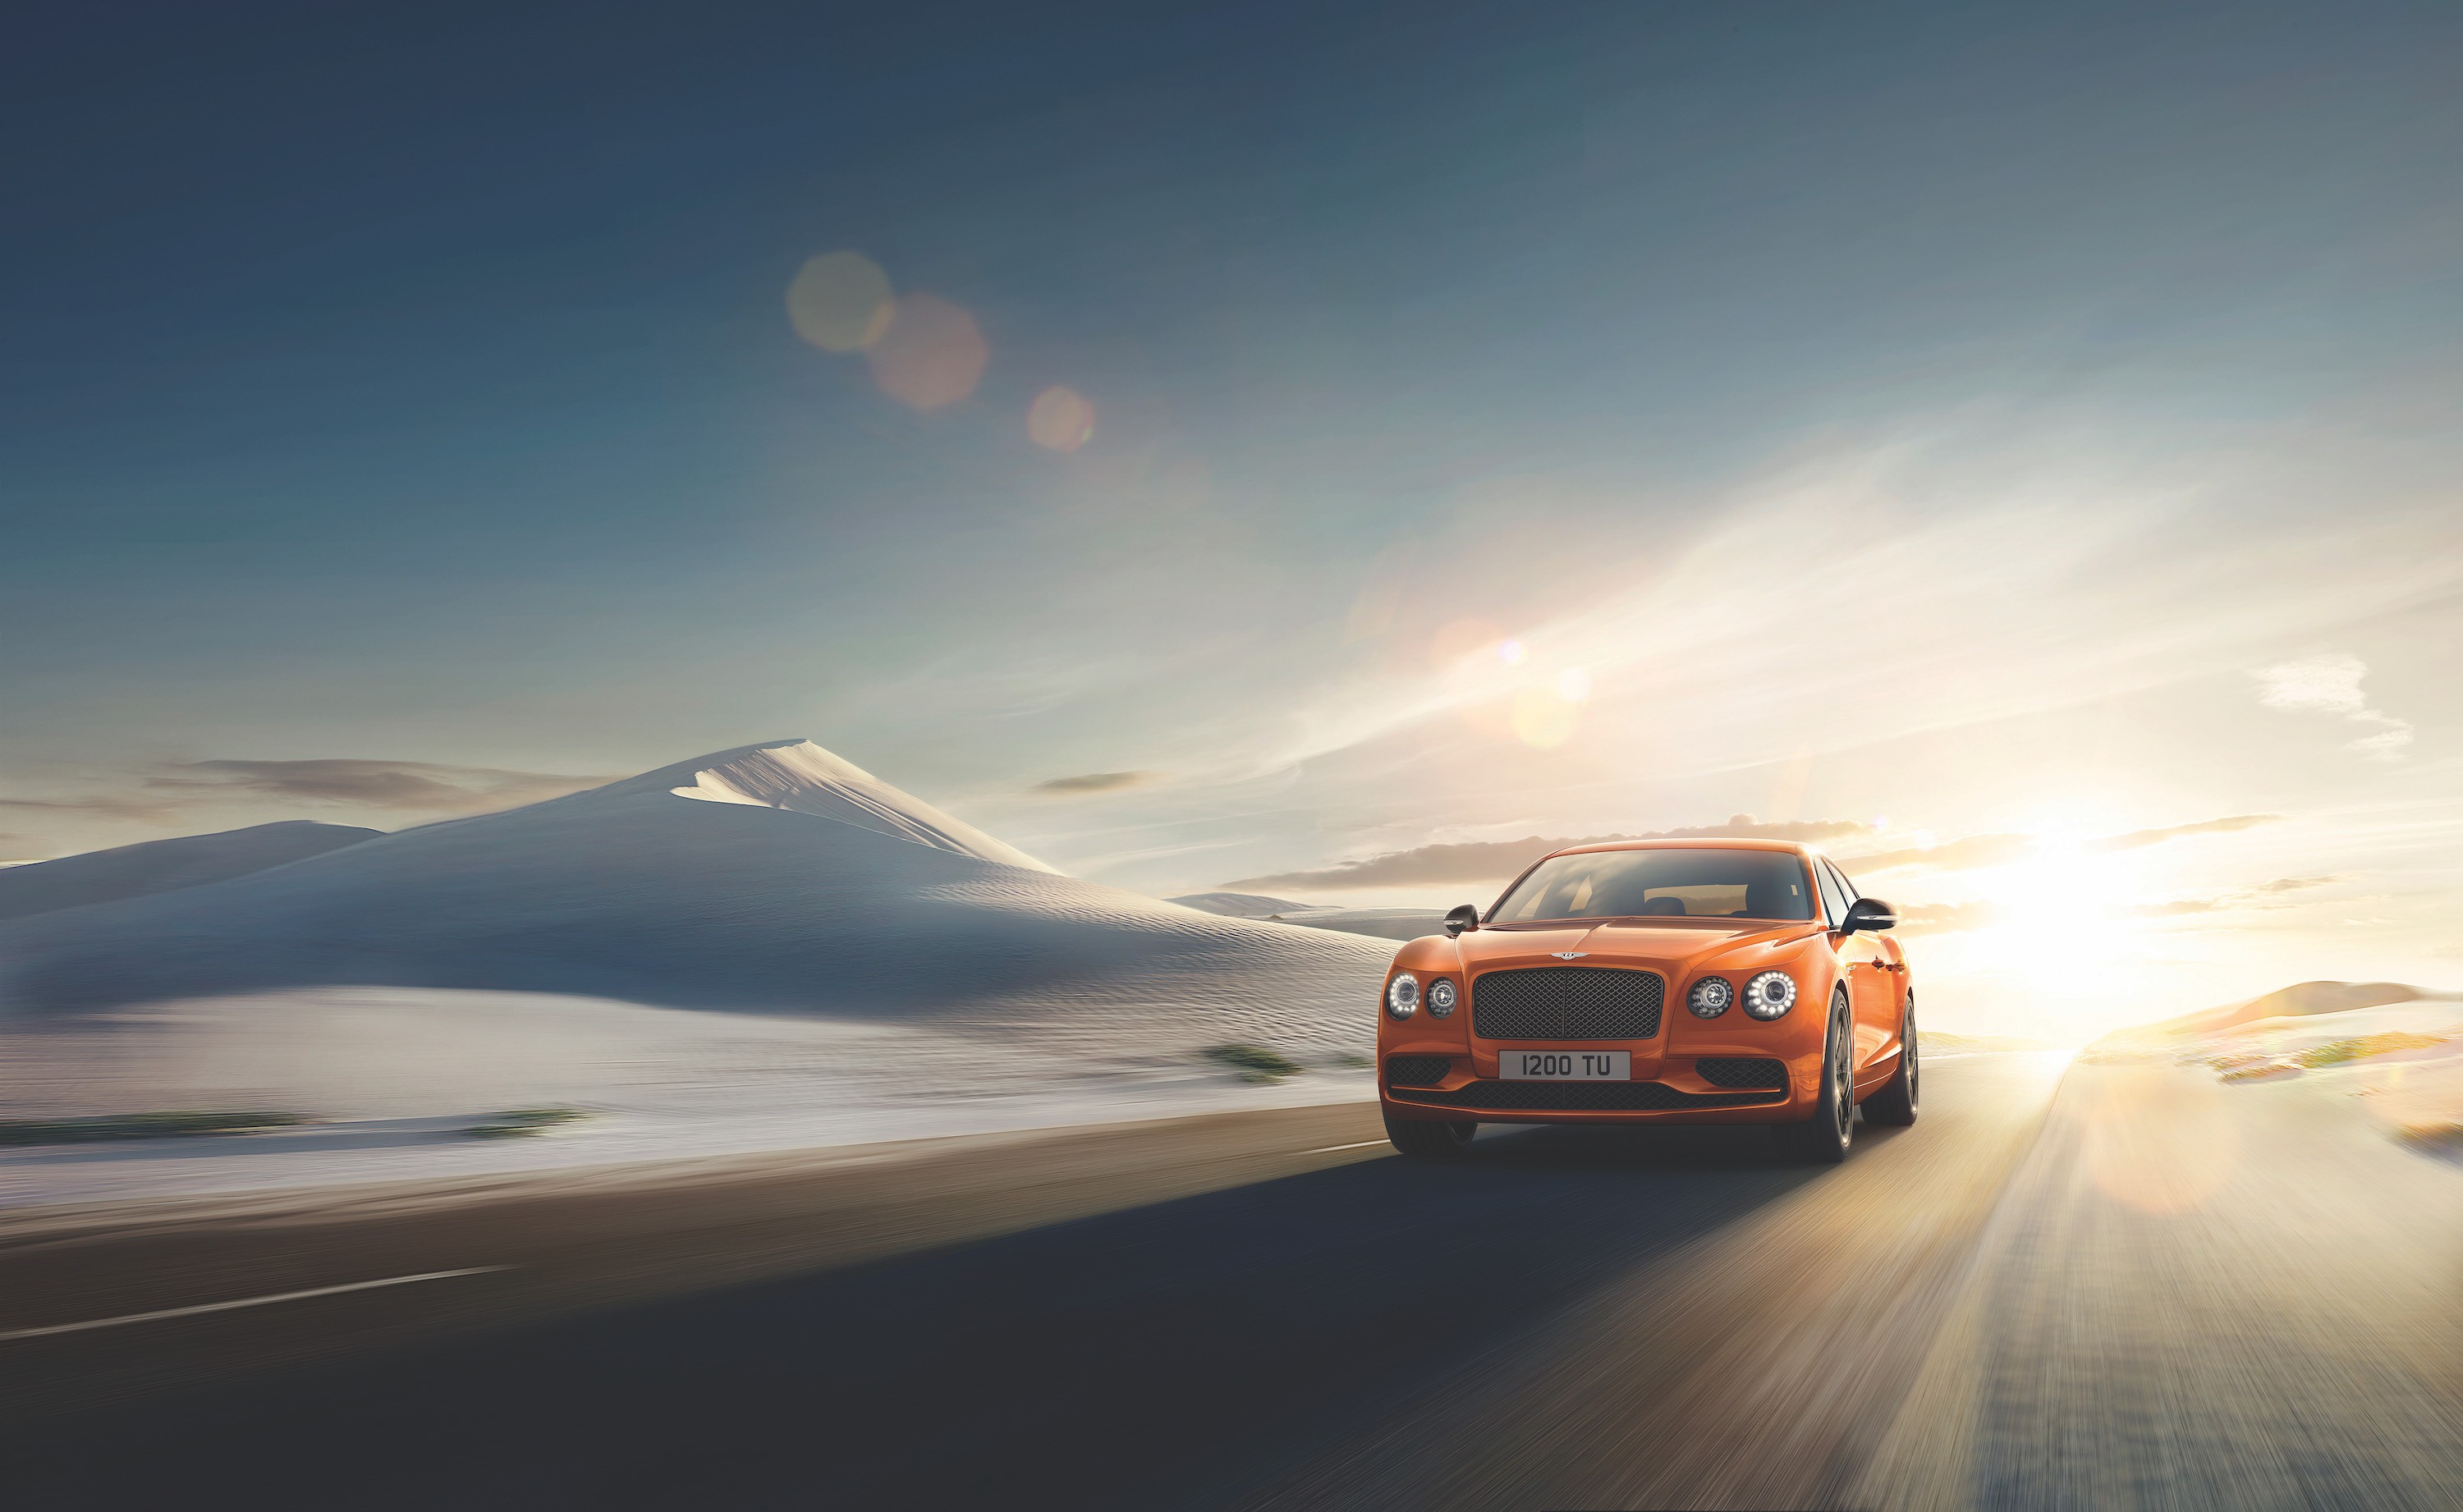 2014 Bentley Continental Flying Spur Hd High Definition - Bentley Flying Spur W12 S - HD Wallpaper 